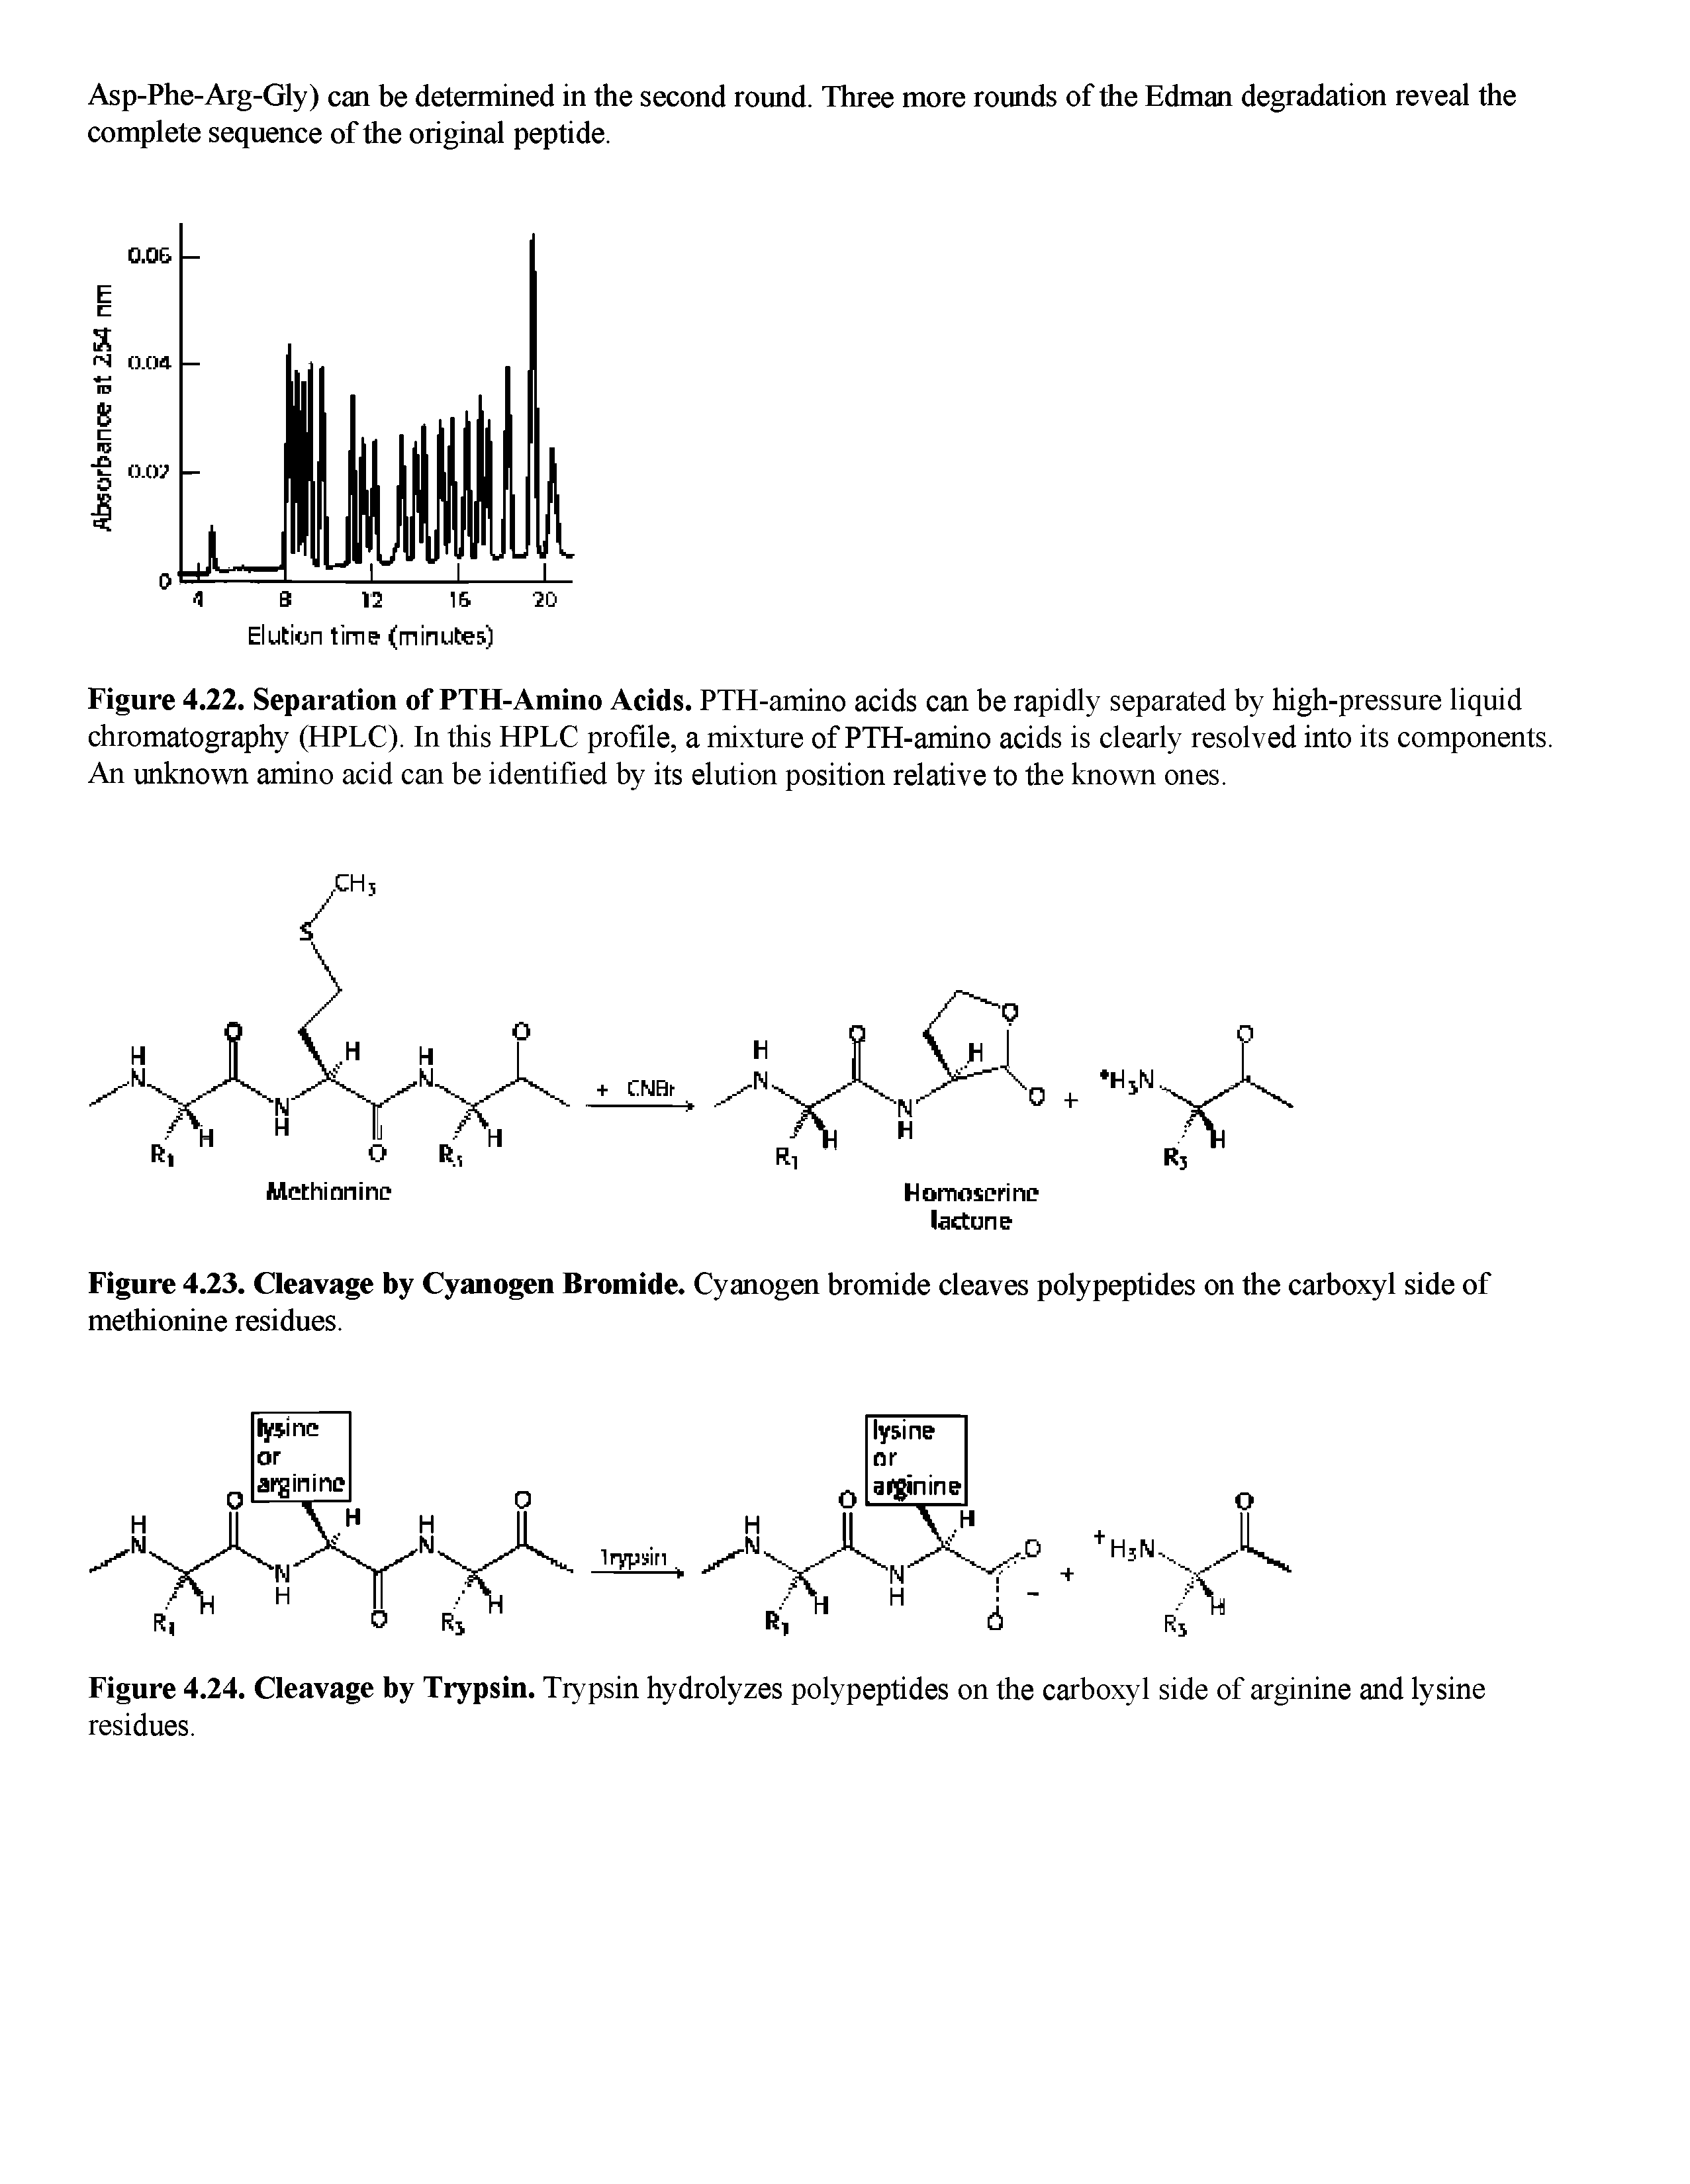 Figure 4.22. Separation of PTH-Amino Acids. PTH-amino acids can be rapidly separated by high-pressure liquid chromatography (HPLC). In this HPLC profile, a mixture of PTH-amino acids is clearly resolved into its components. An unknovm amino acid can be identified by its elution position relative to the known ones.